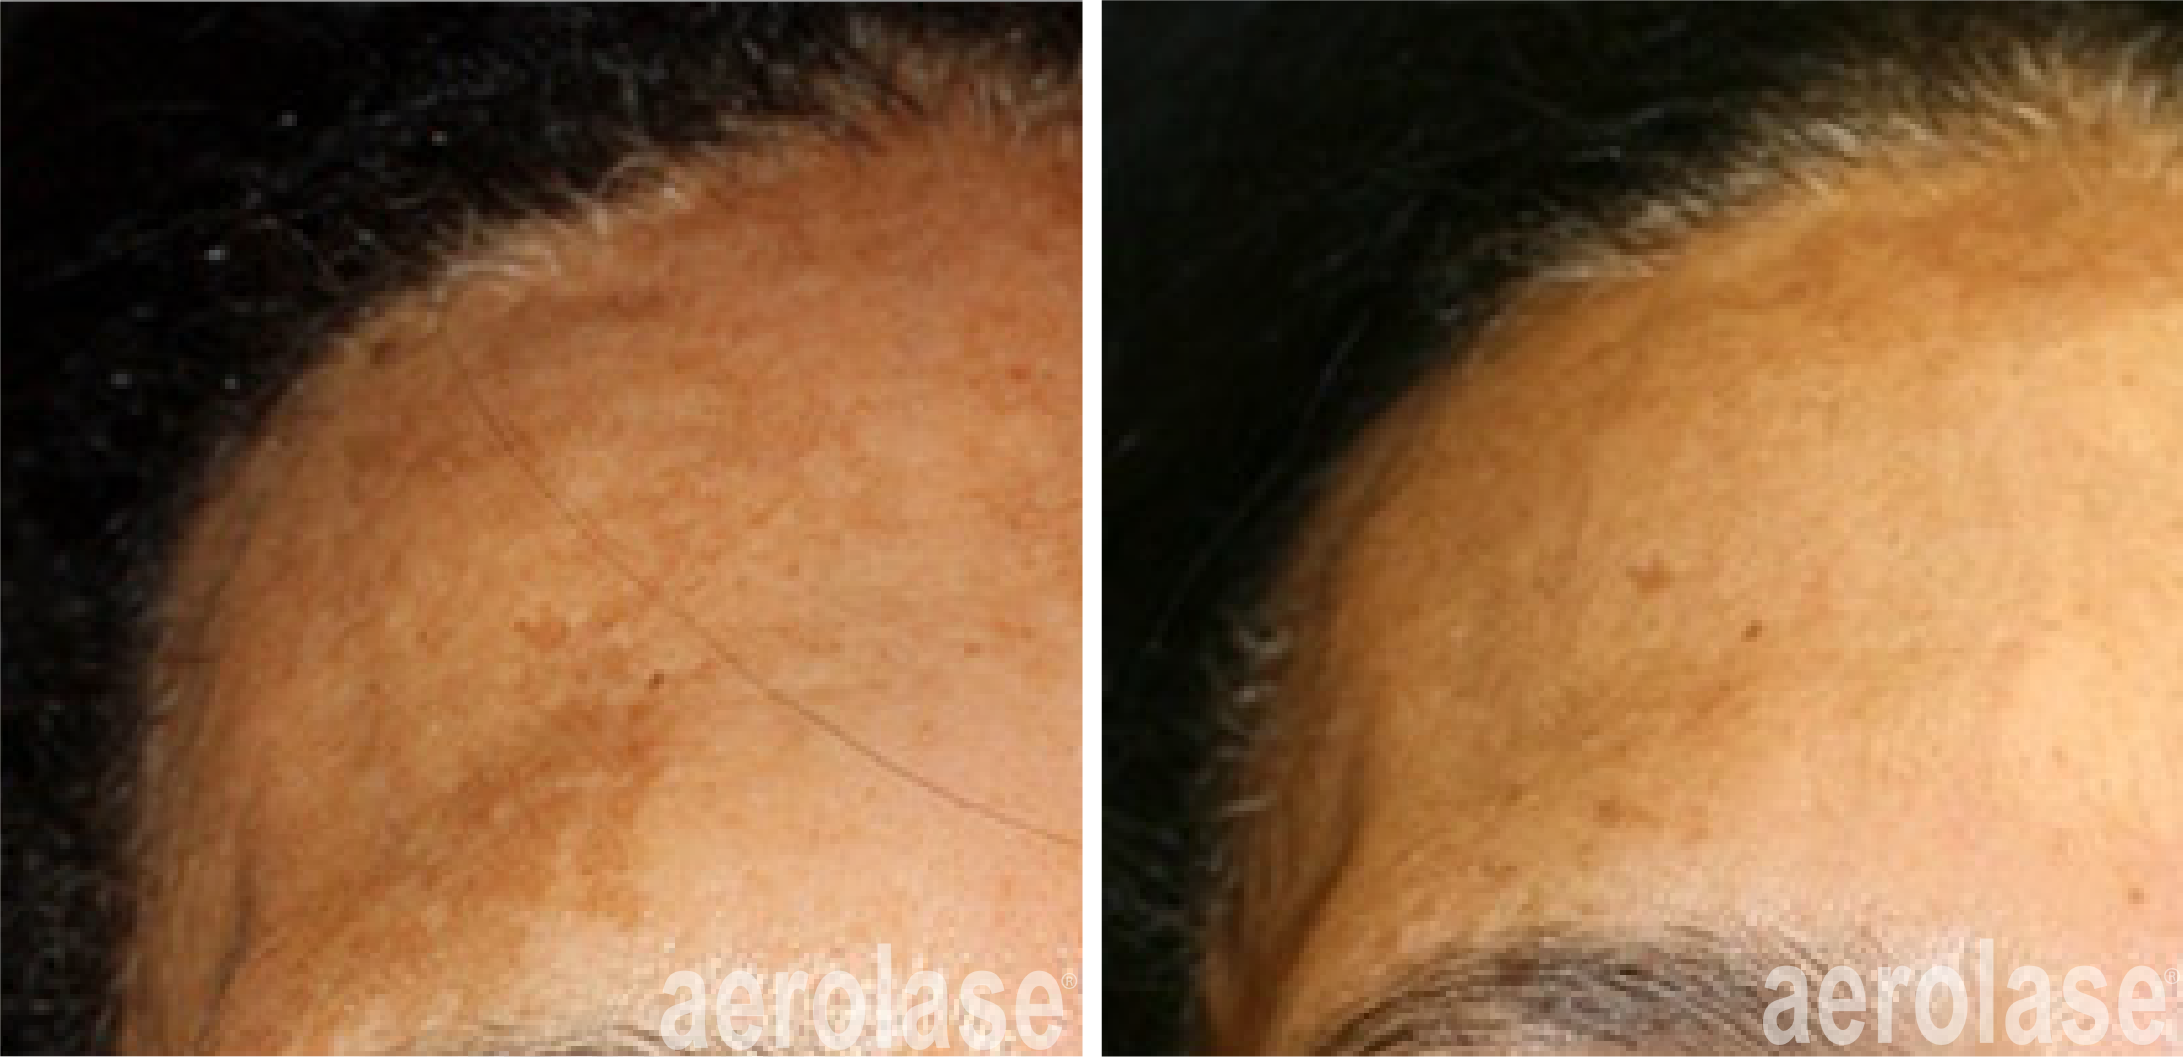 aerolase-neoskin-melasma-after-1-treatment-combined-with-tca-peel-cheryl-burgess.png